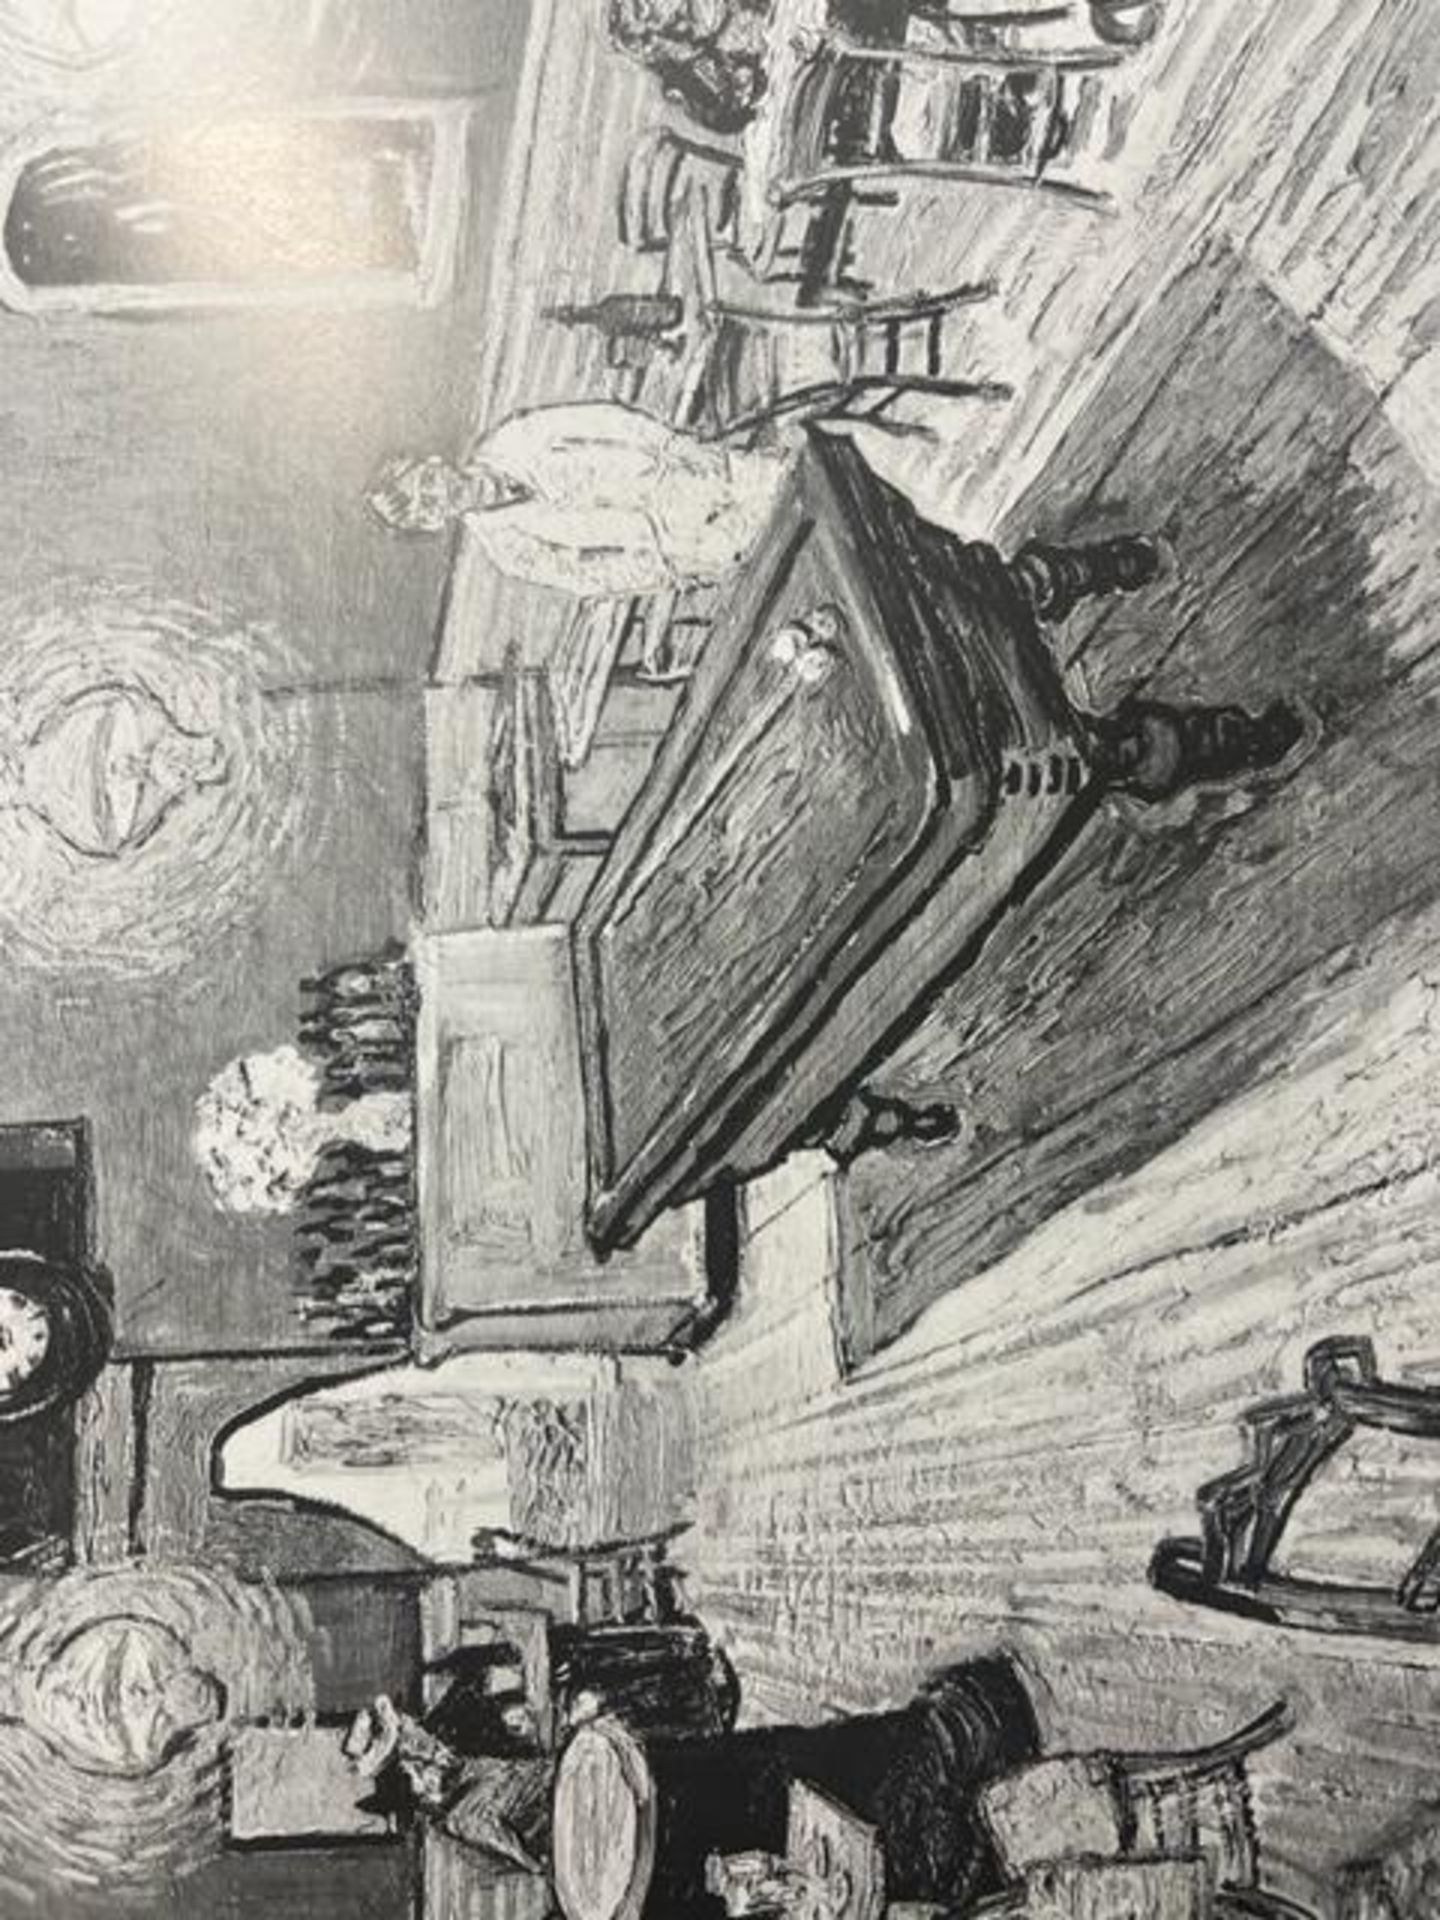 Vincent van Gogh "The Night Cafe" Print. - Image 4 of 6